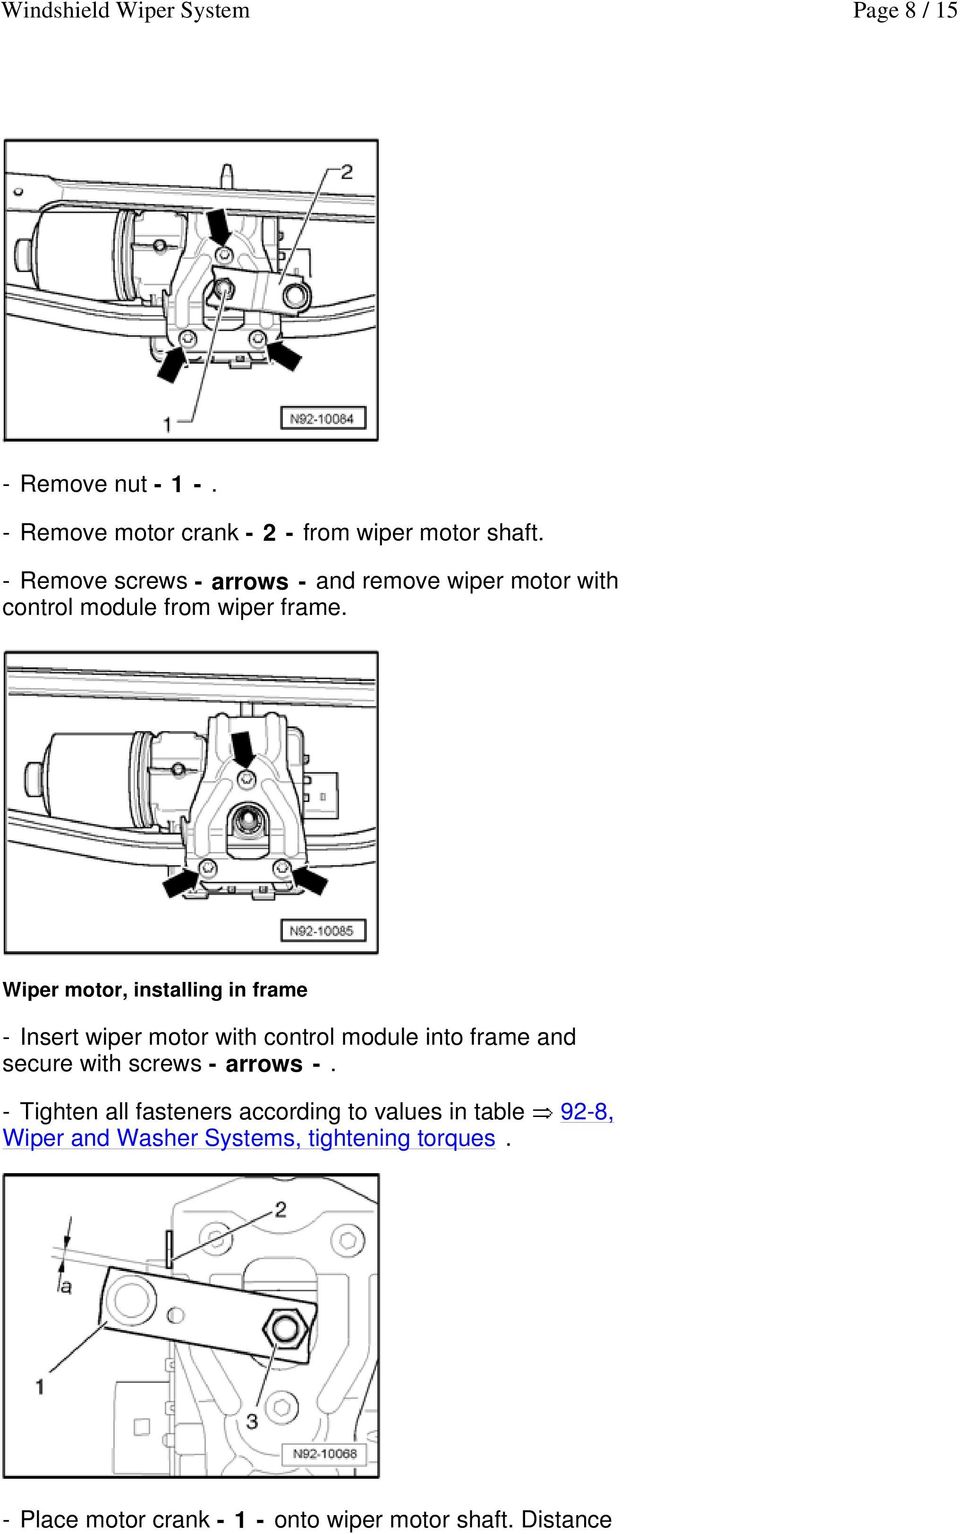 Wiper motor, installing in frame - Insert wiper motor with control module into frame and secure with screws - arrows -.